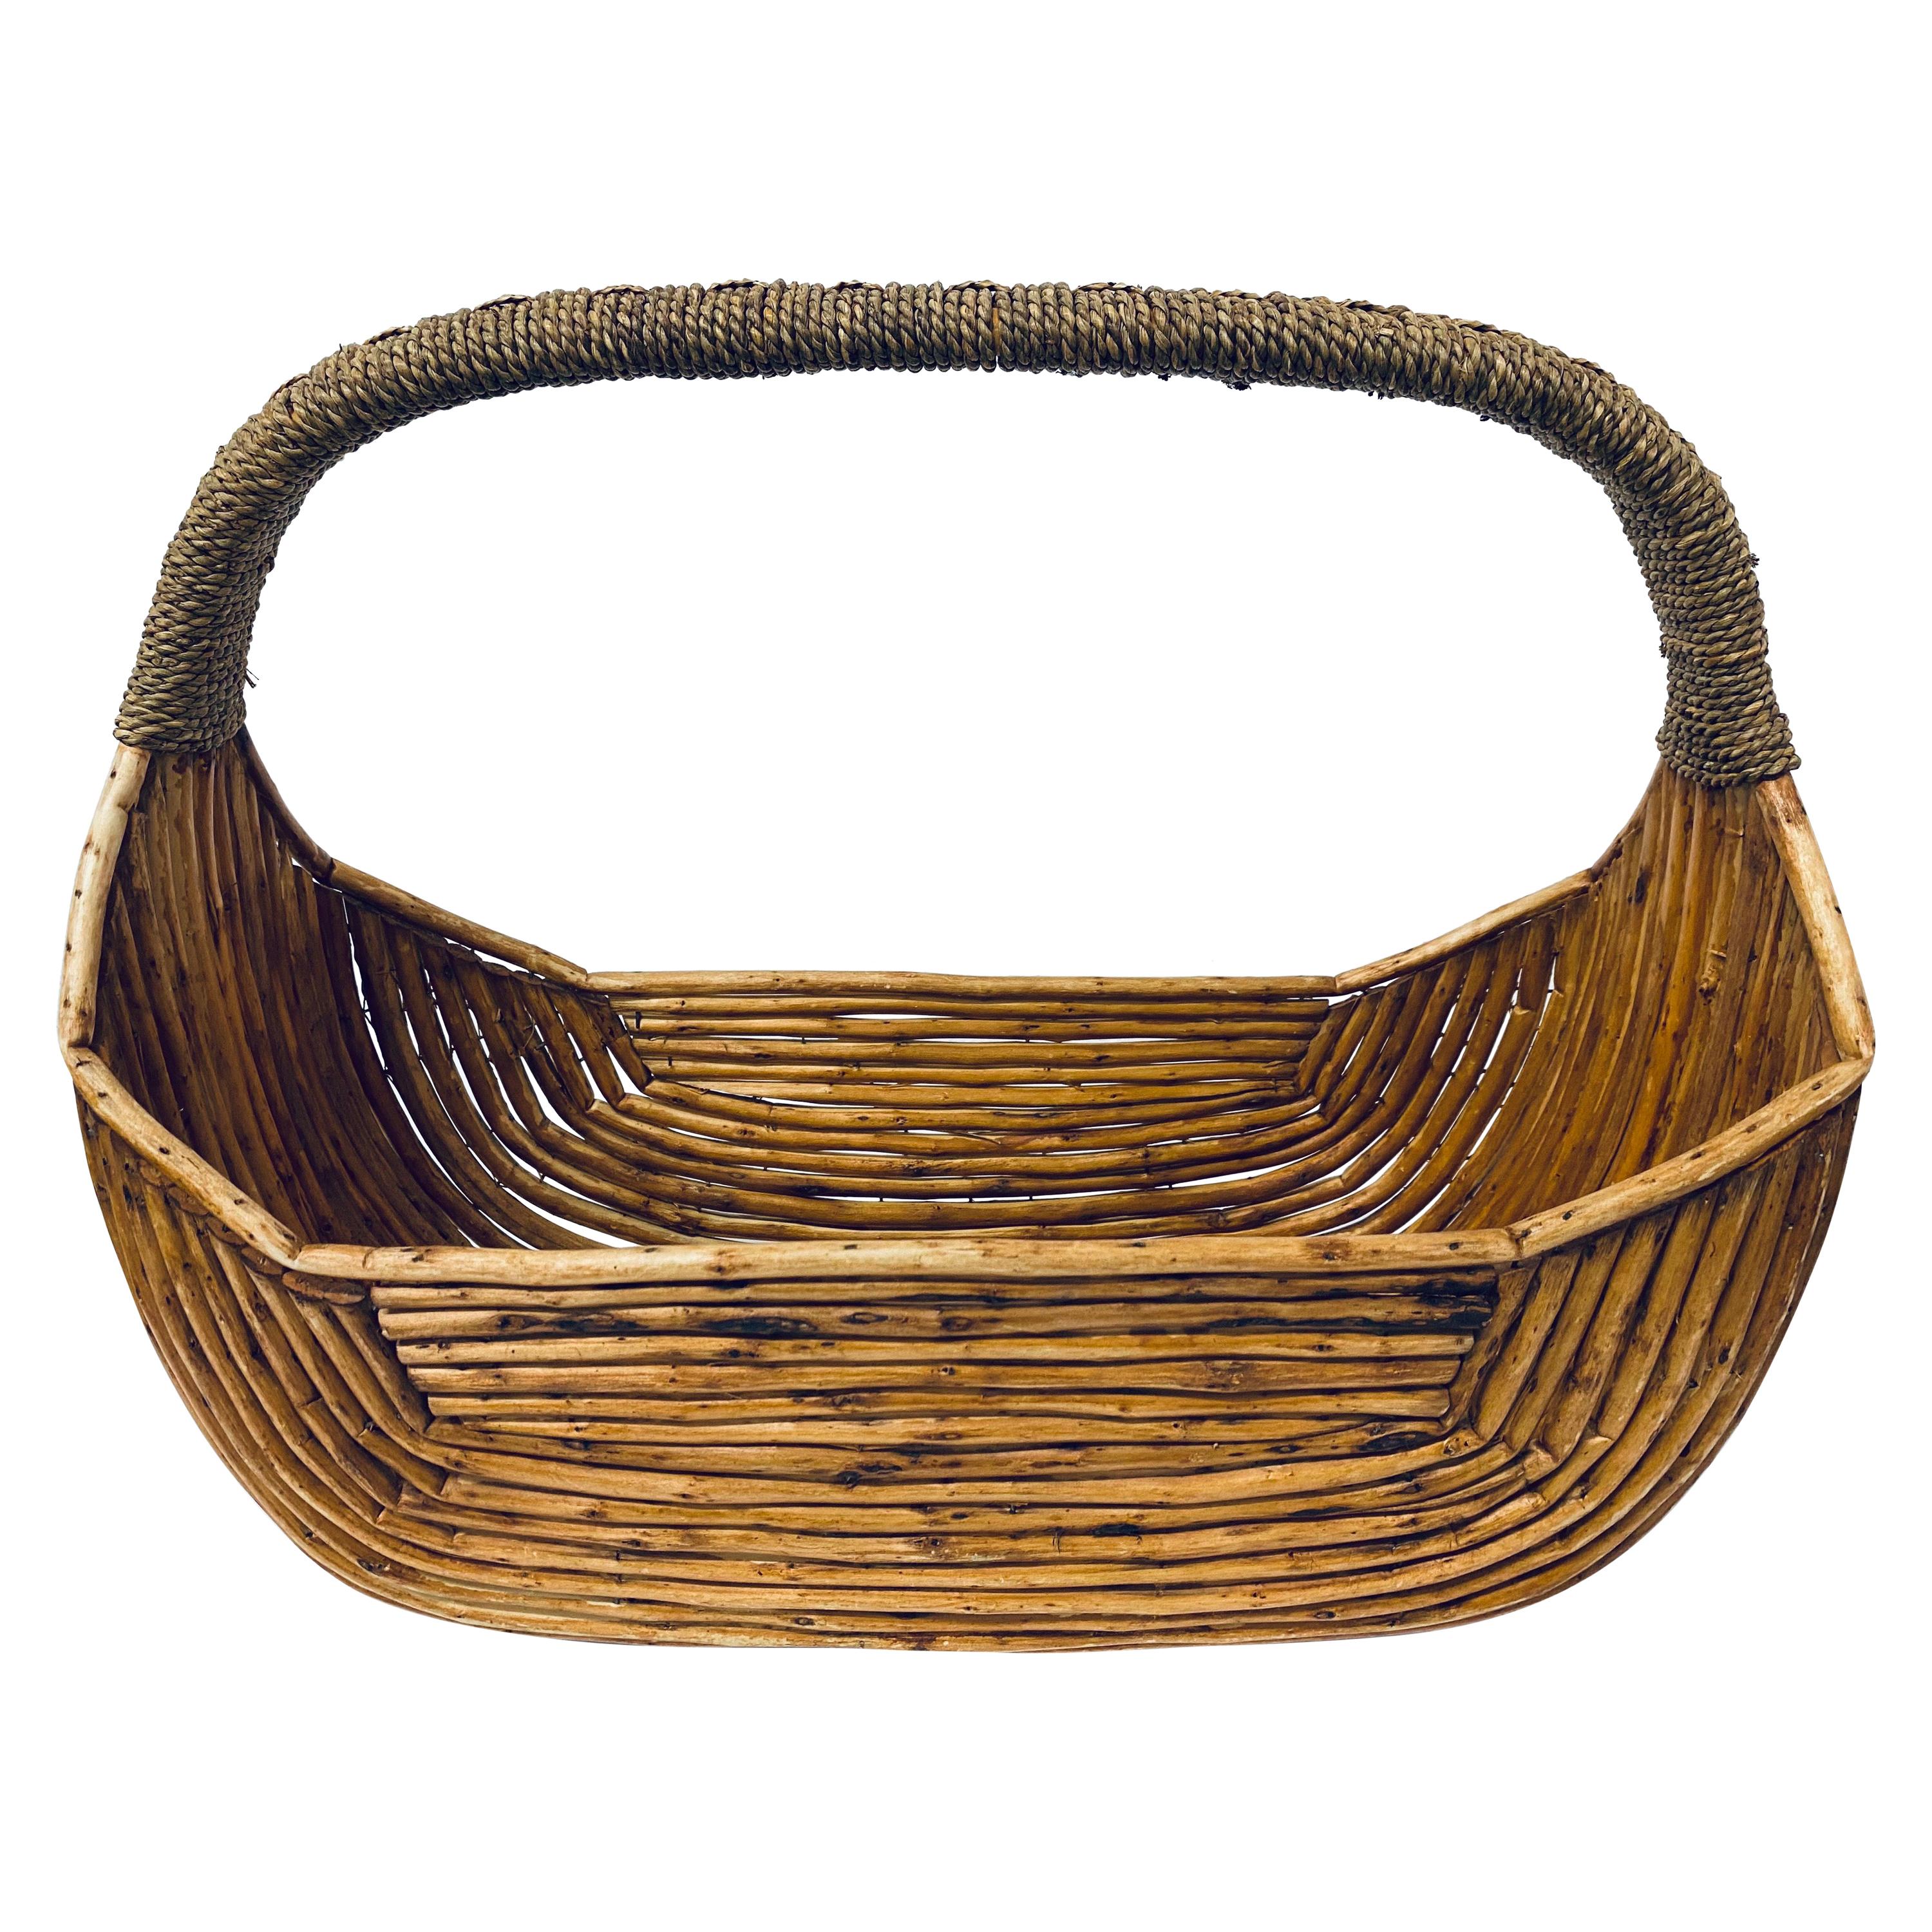 Midcentury Pencil Reed Basket with Woven Handle, 1970s